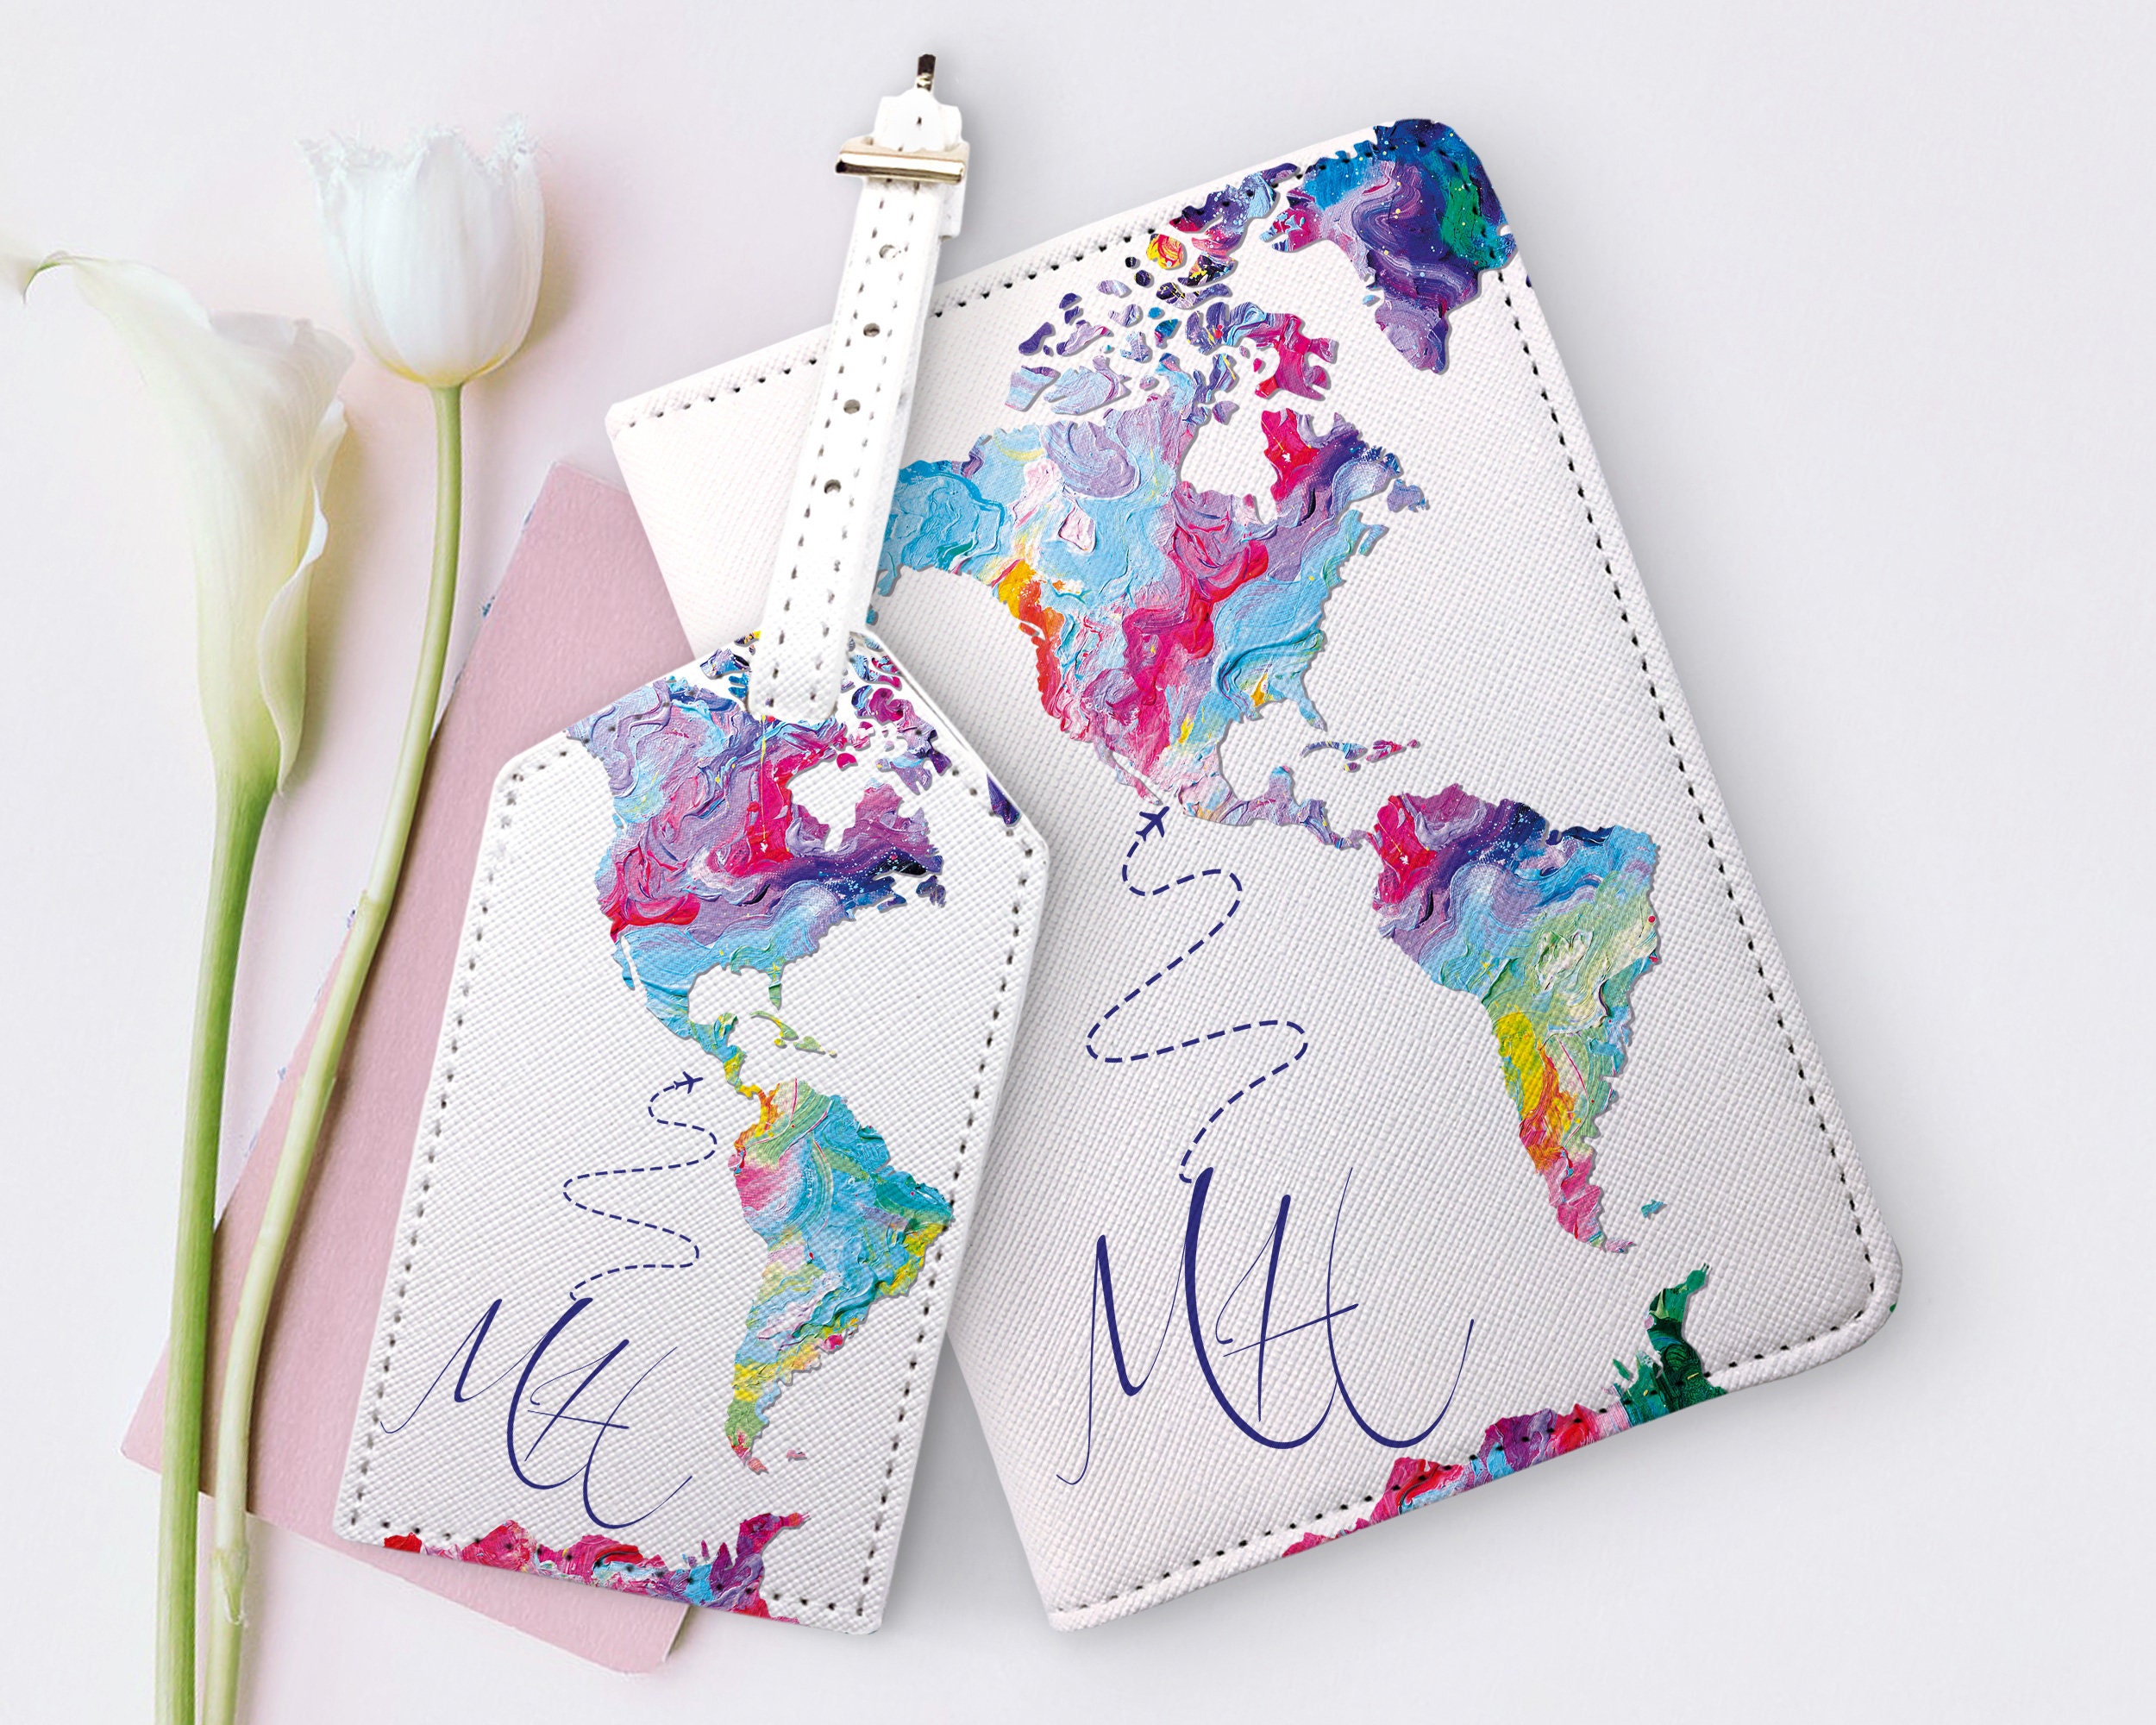 World Map or Compass Personalized Leather Passport Cover – Left Coast  Original